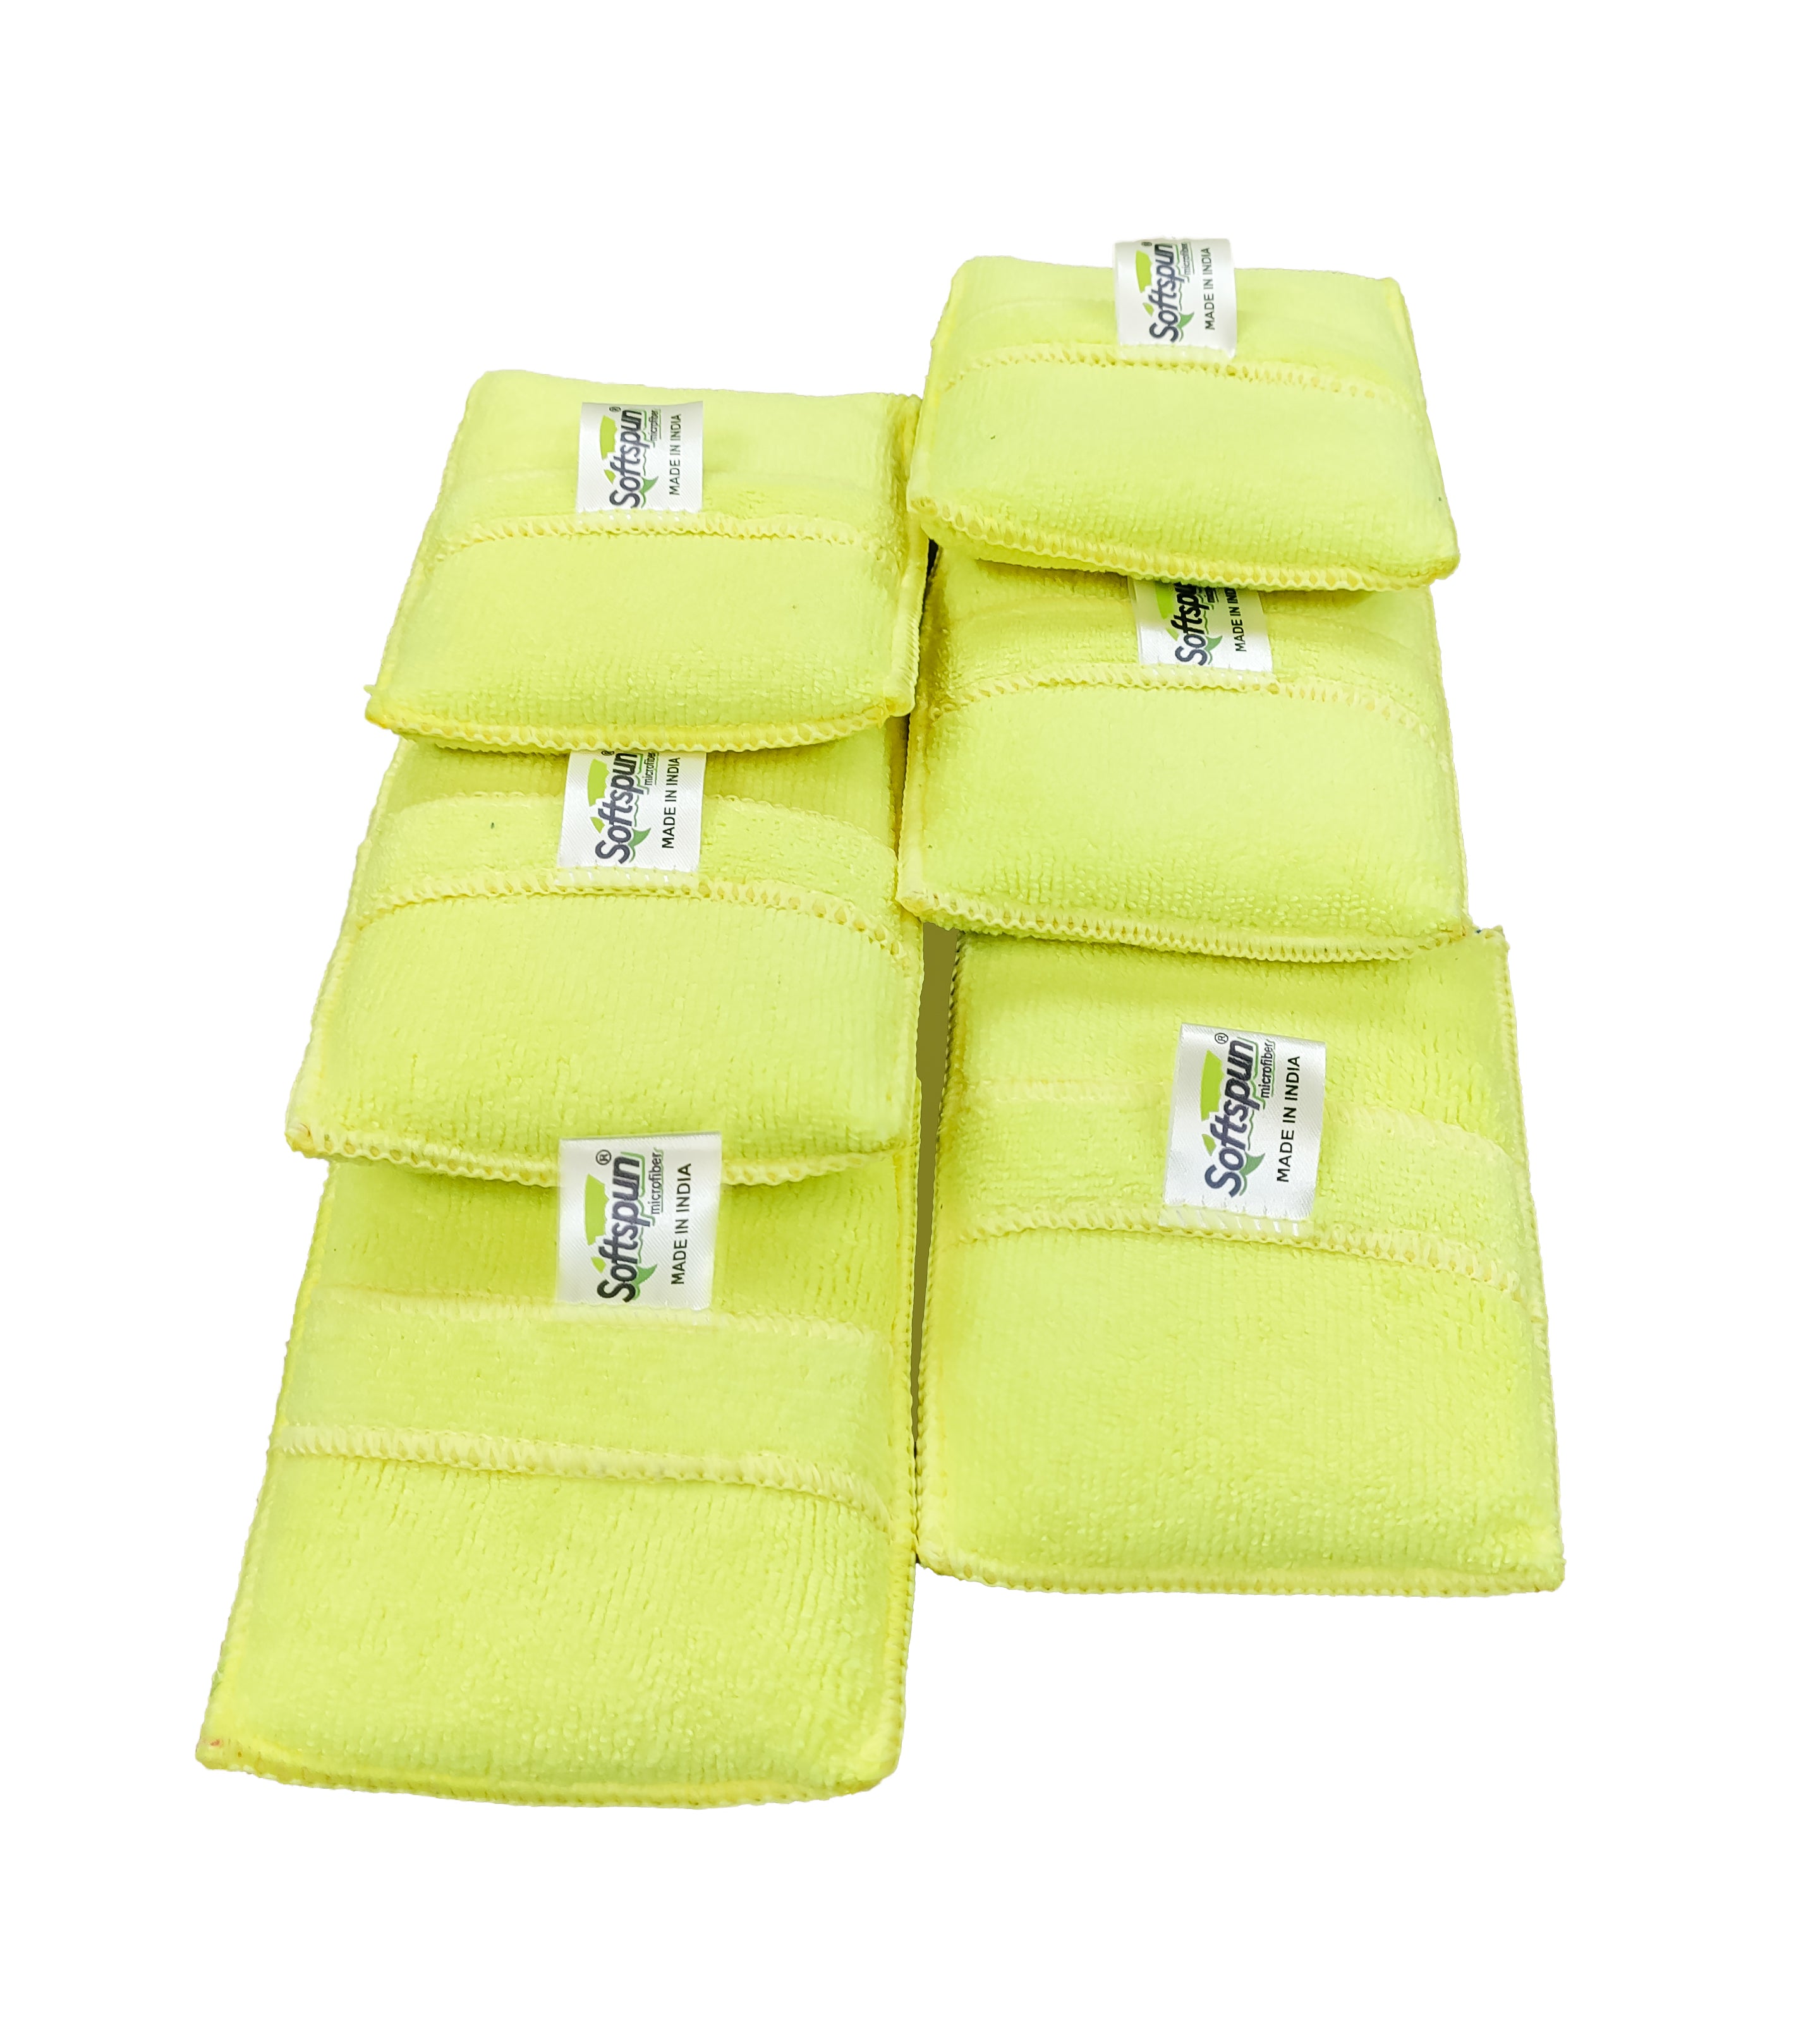 SOFTSPUN Microfiber Reusable Square Polishing Pad, 6 Pieces Set, Multipurpose. Ultra-Soft Applicator Pads with Finger Band Perfect Cleaning for car, Bike, Window, and More.